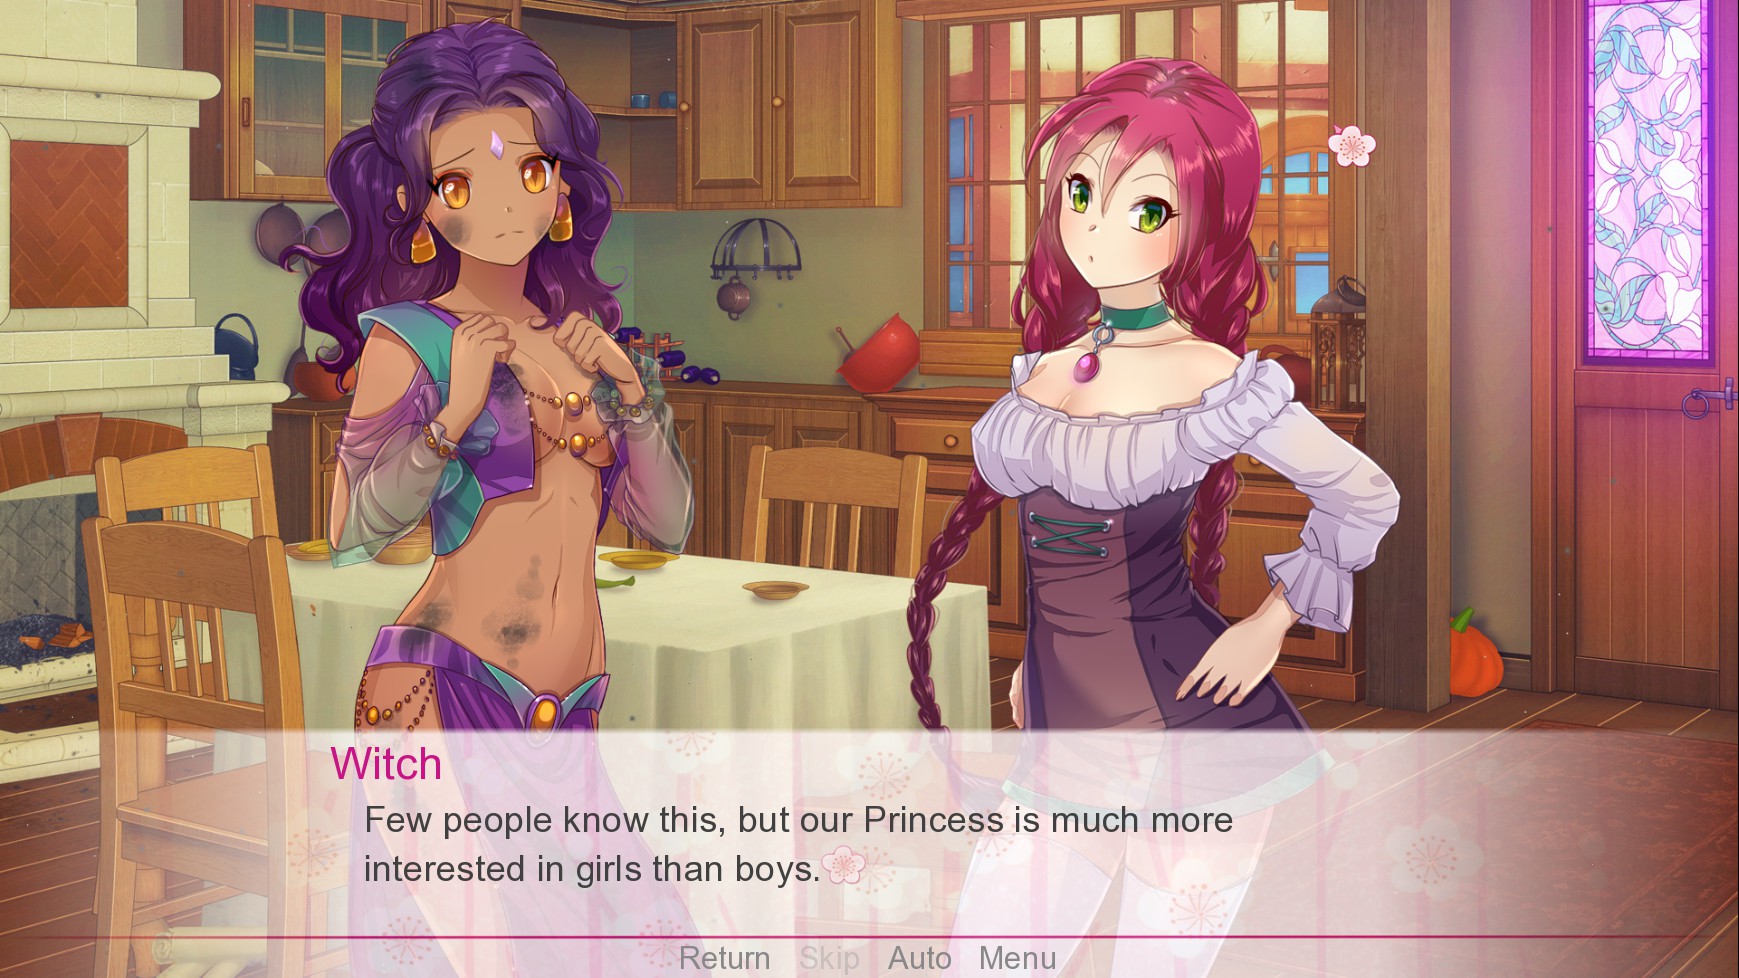 Two feminine characters. A dialogue box shows 'Witch' saying 'Few people know this, but our princess is much more interested in girls than boys.'